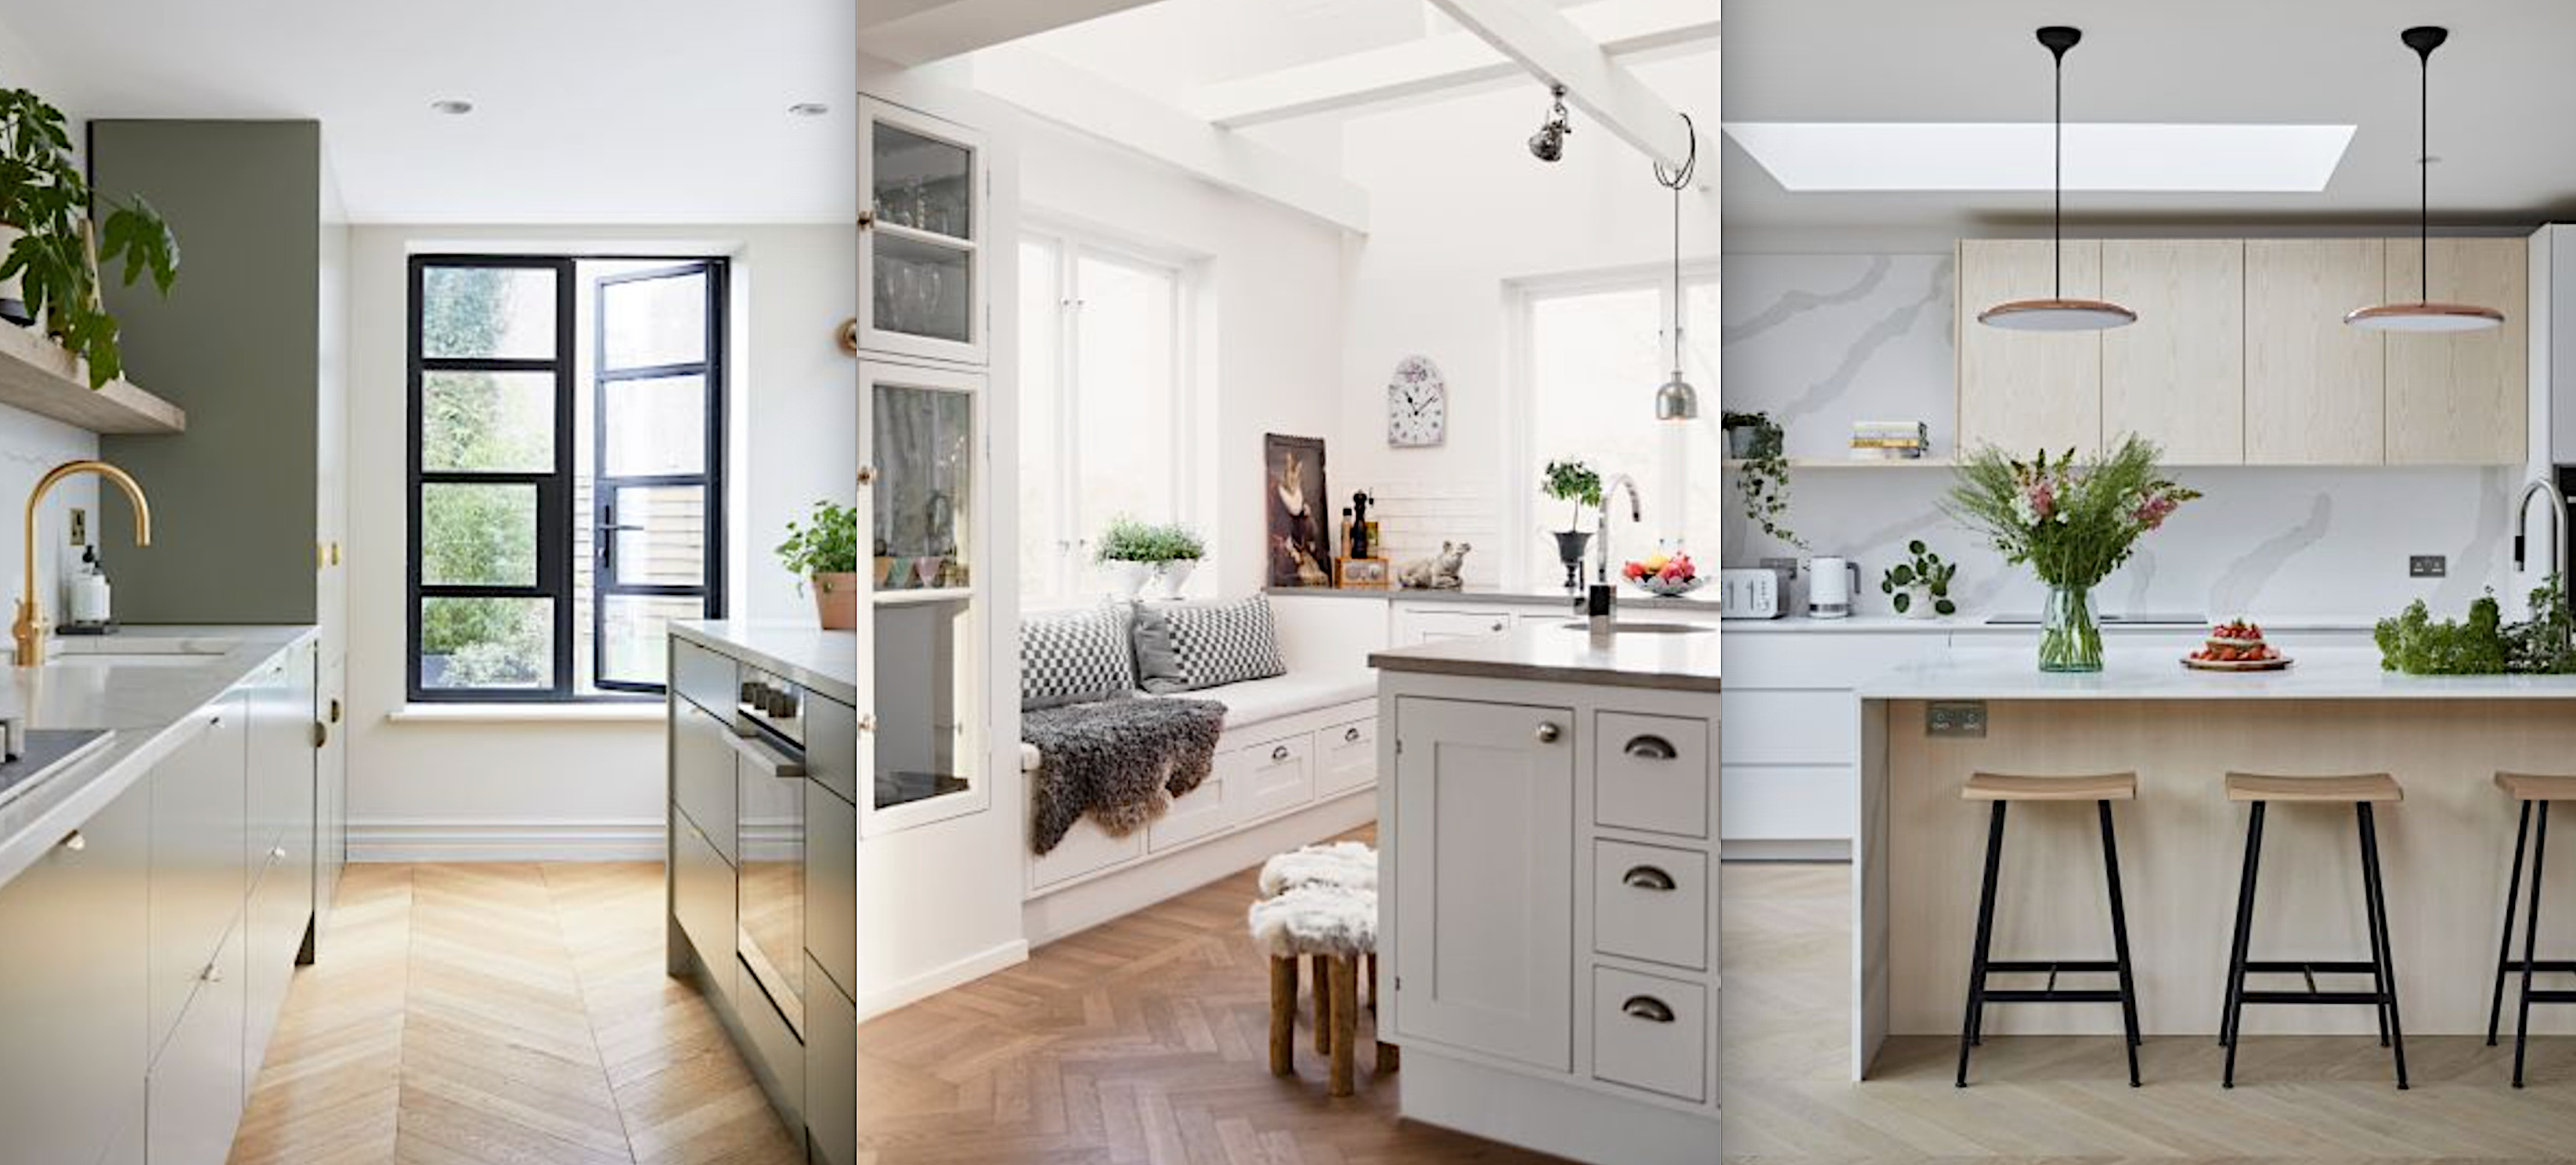 Scandinavian kitchens 18 ideas function and character   Homes ...